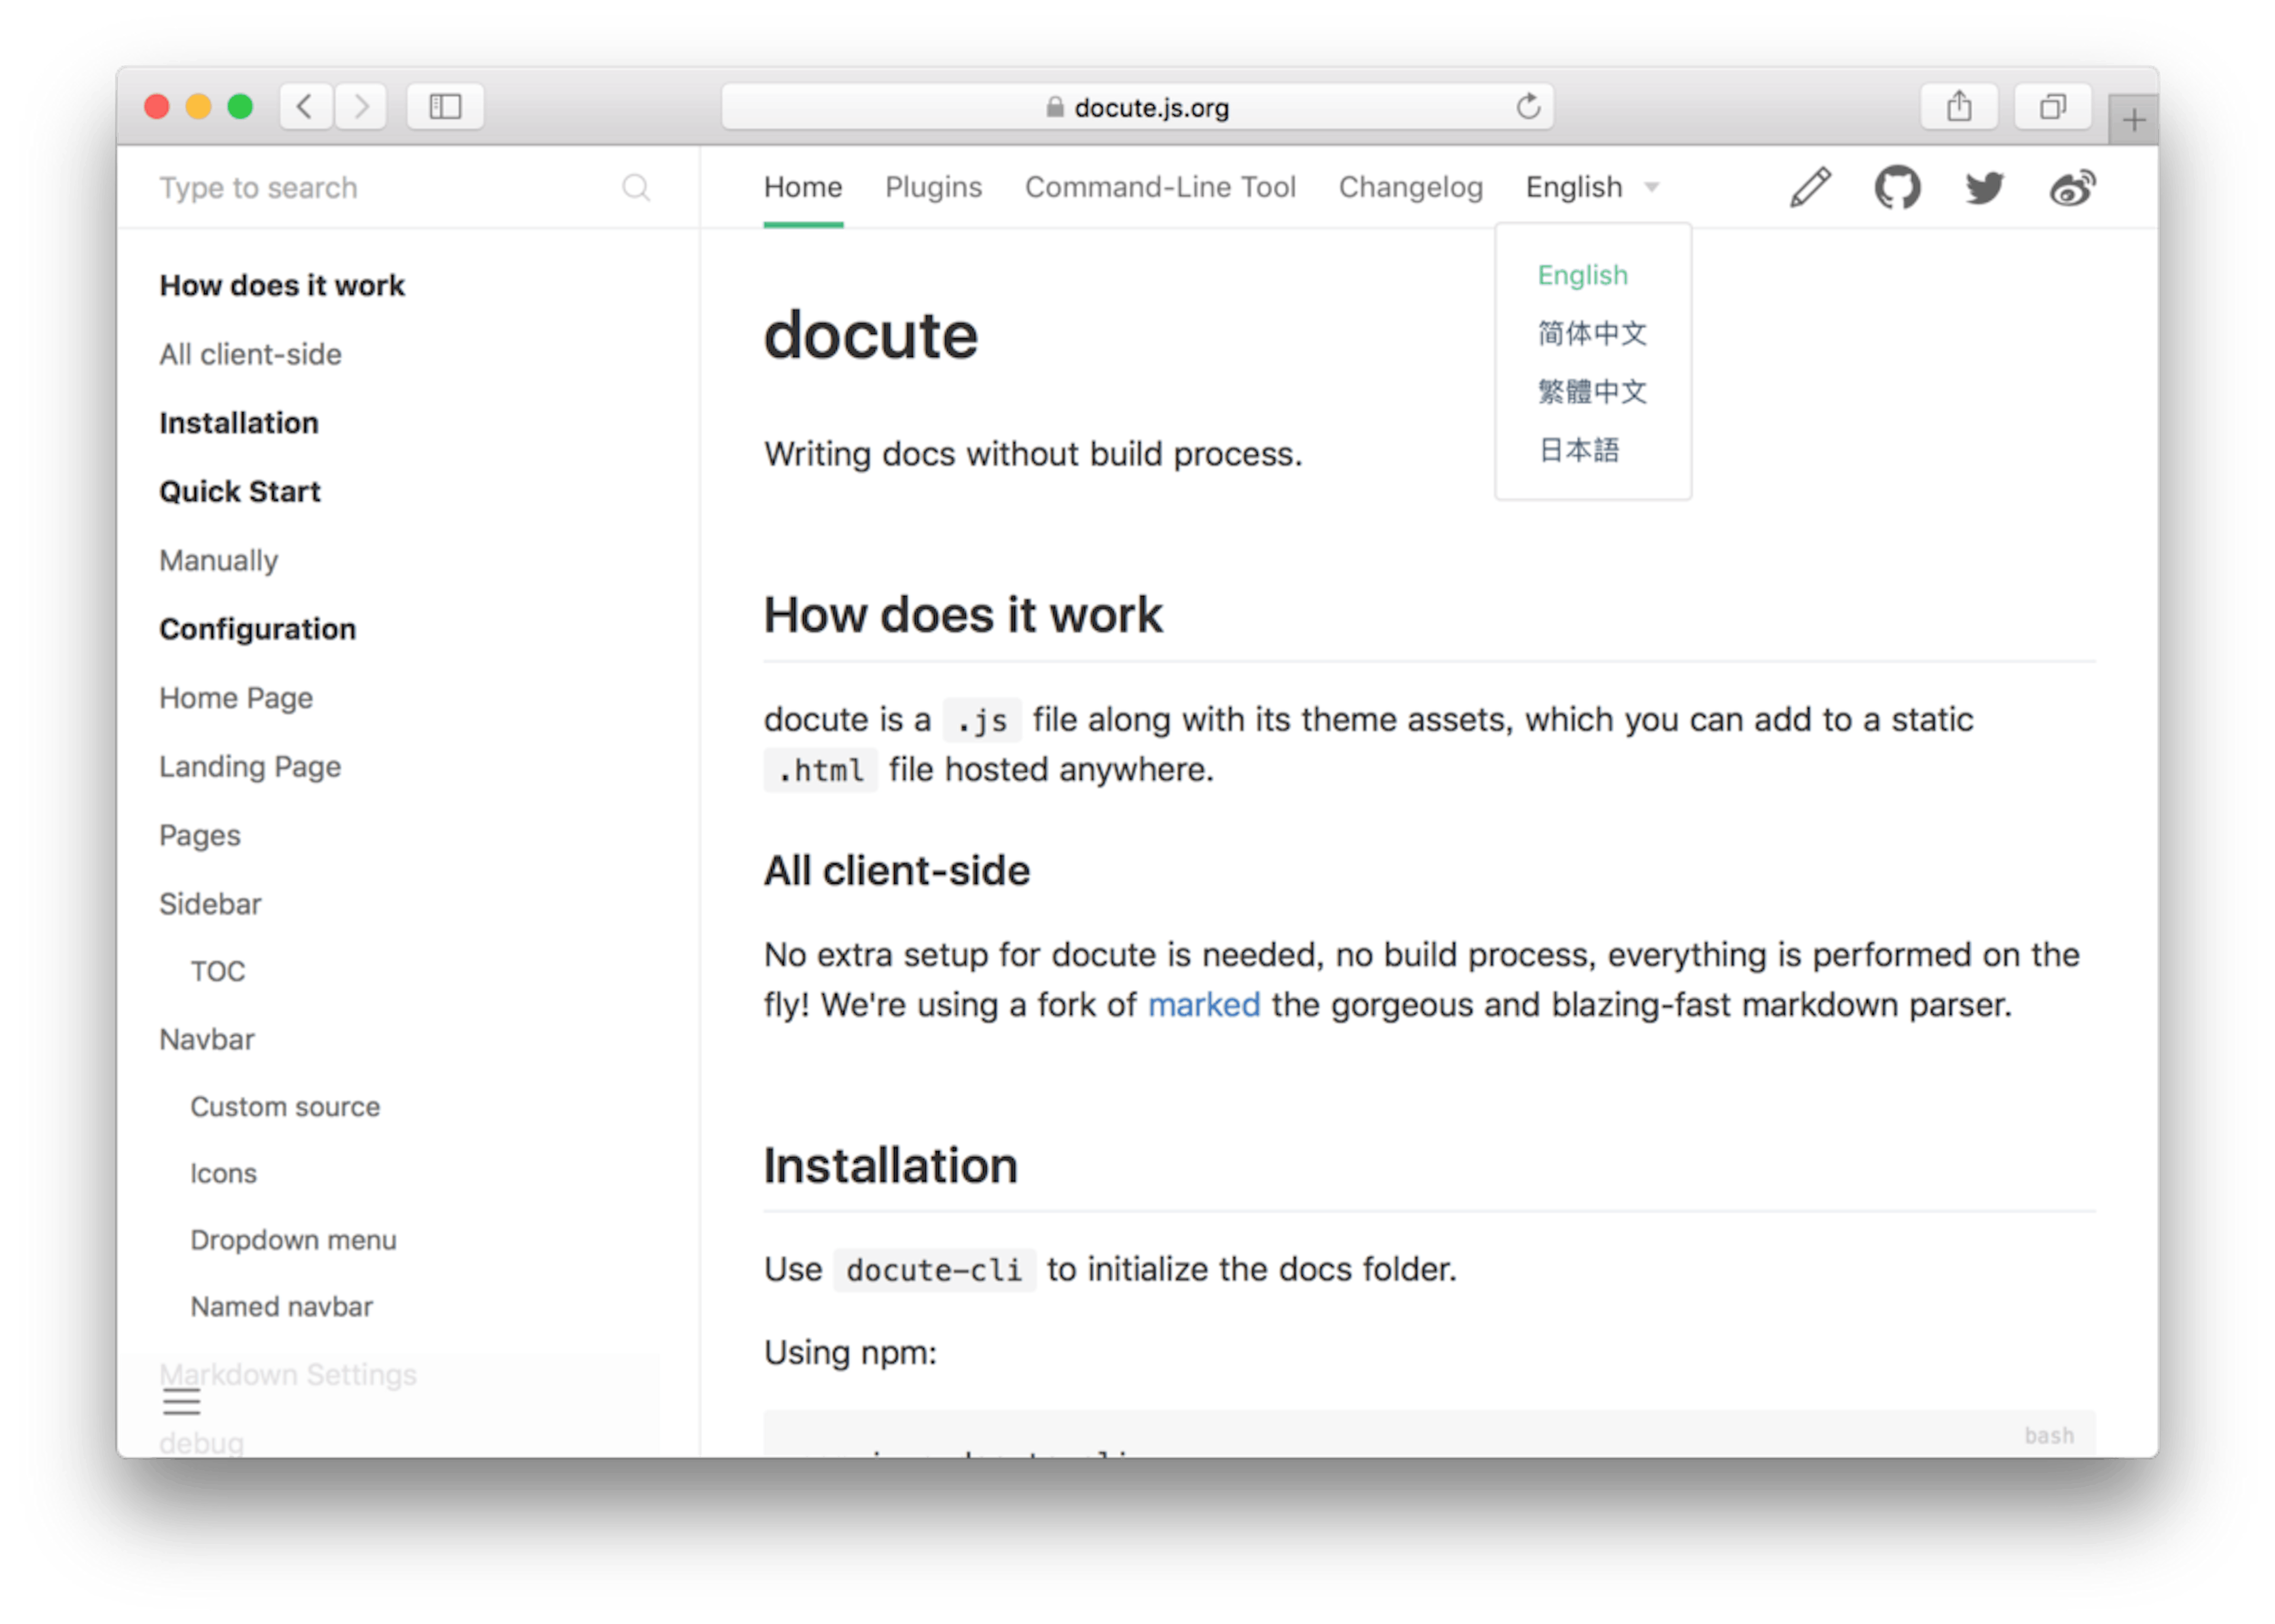 featured image - Writing docs using Markdown and/or Vue component without build process